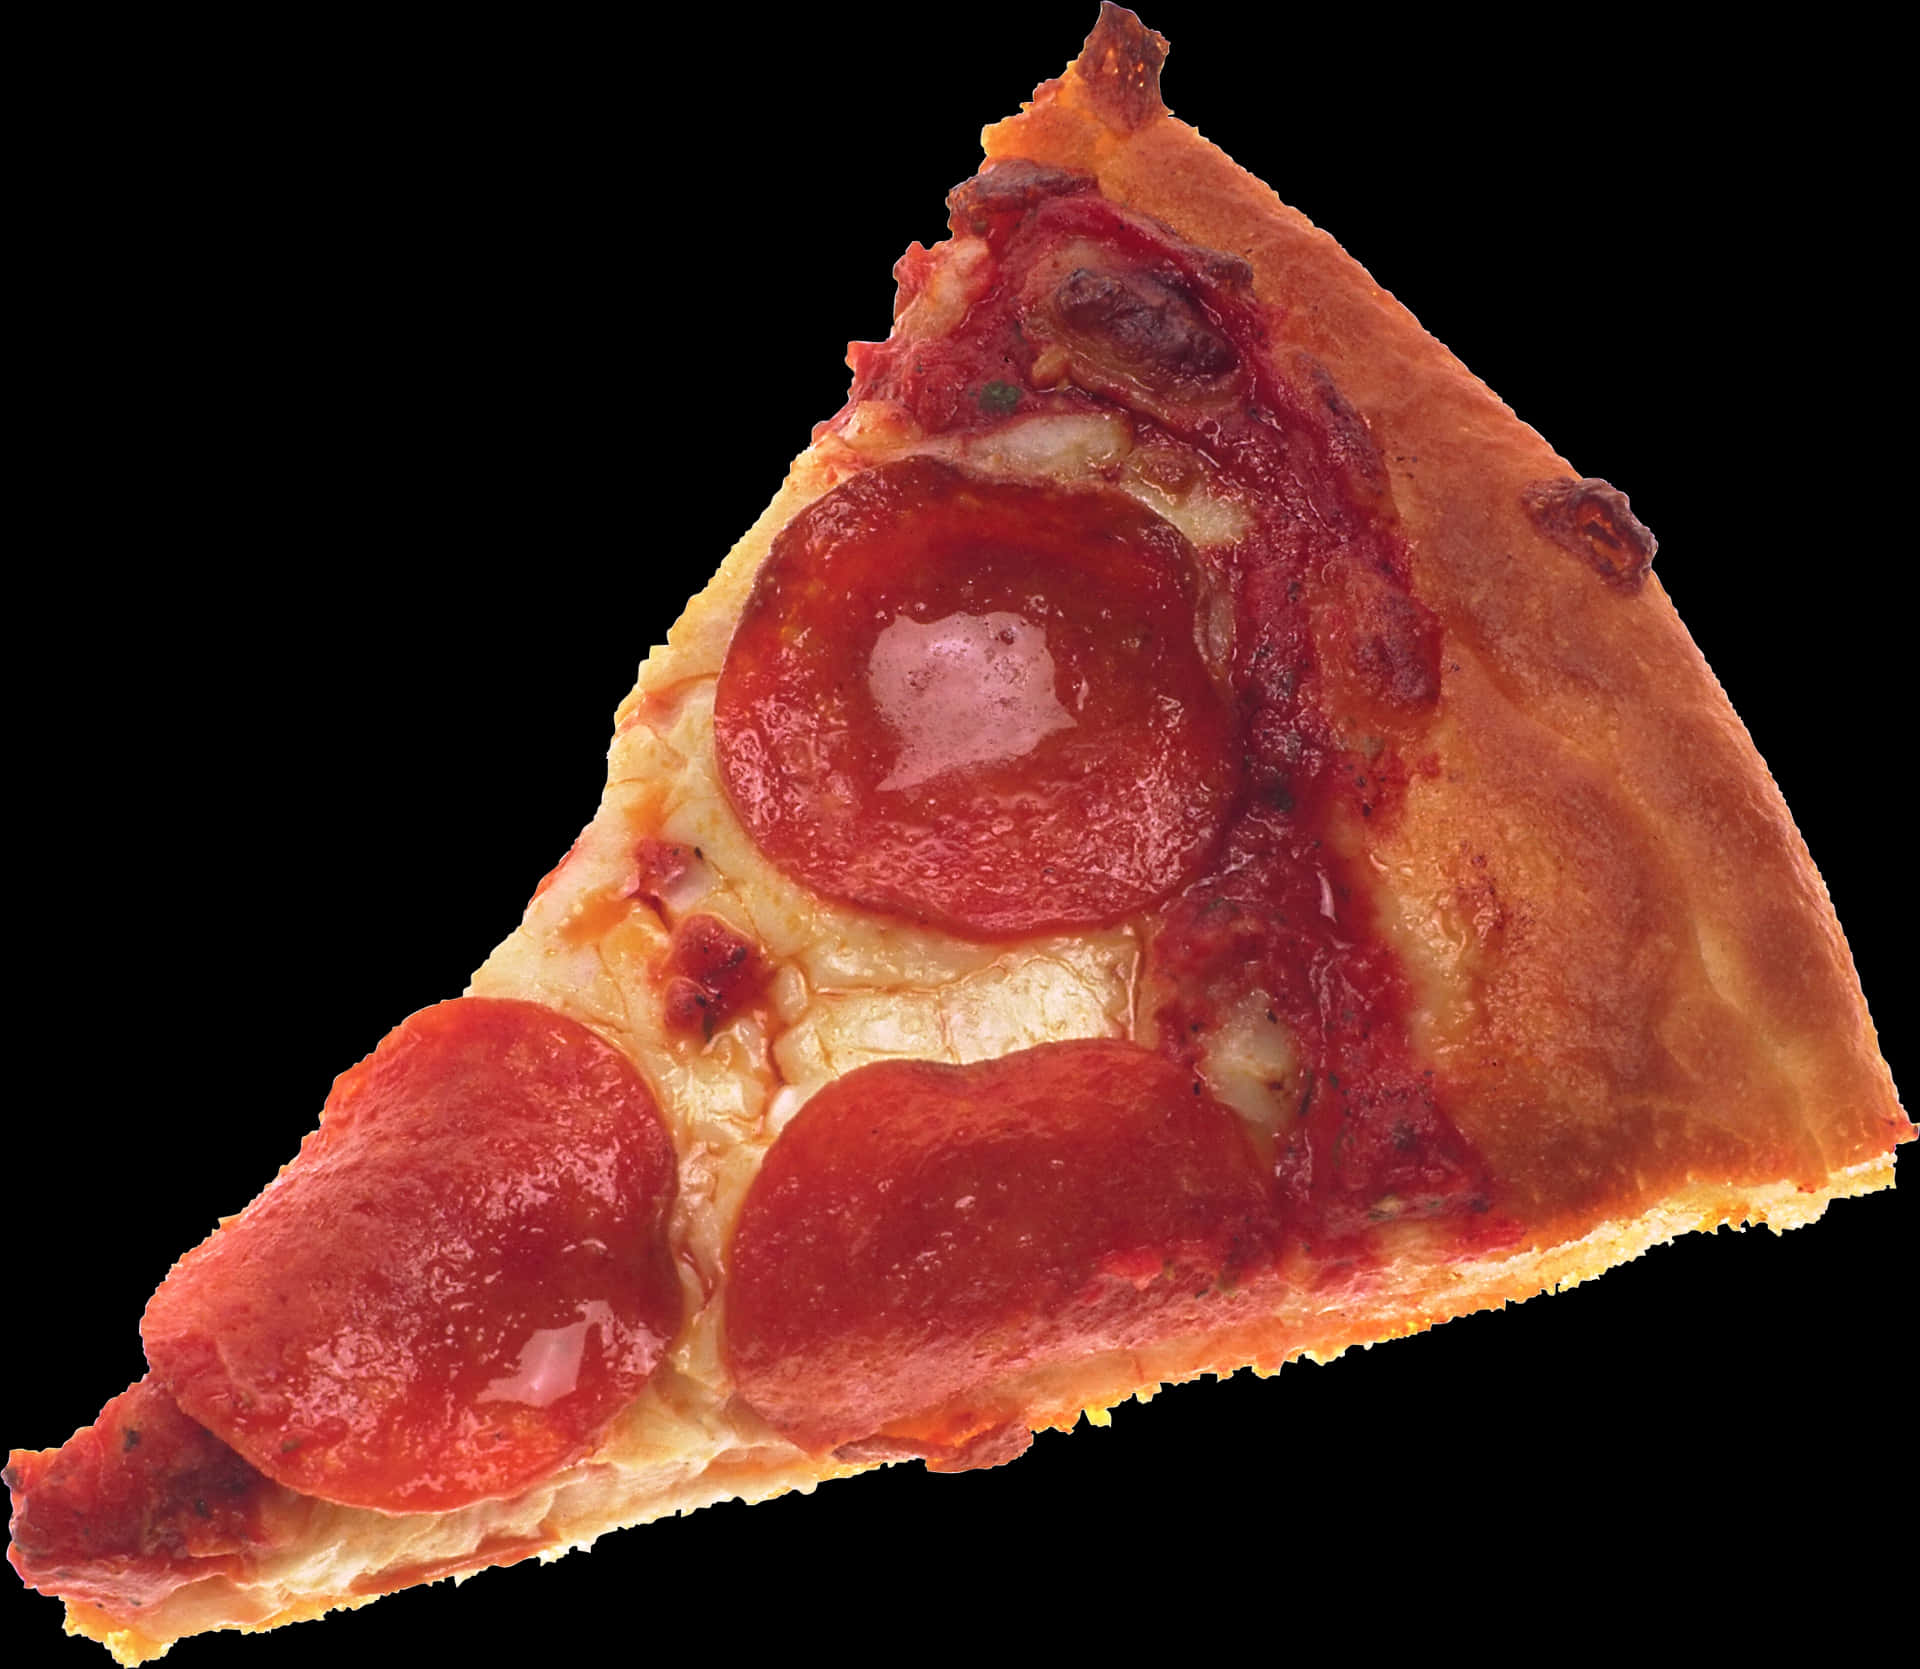 Pepperoni Pizza Slice Isolated PNG